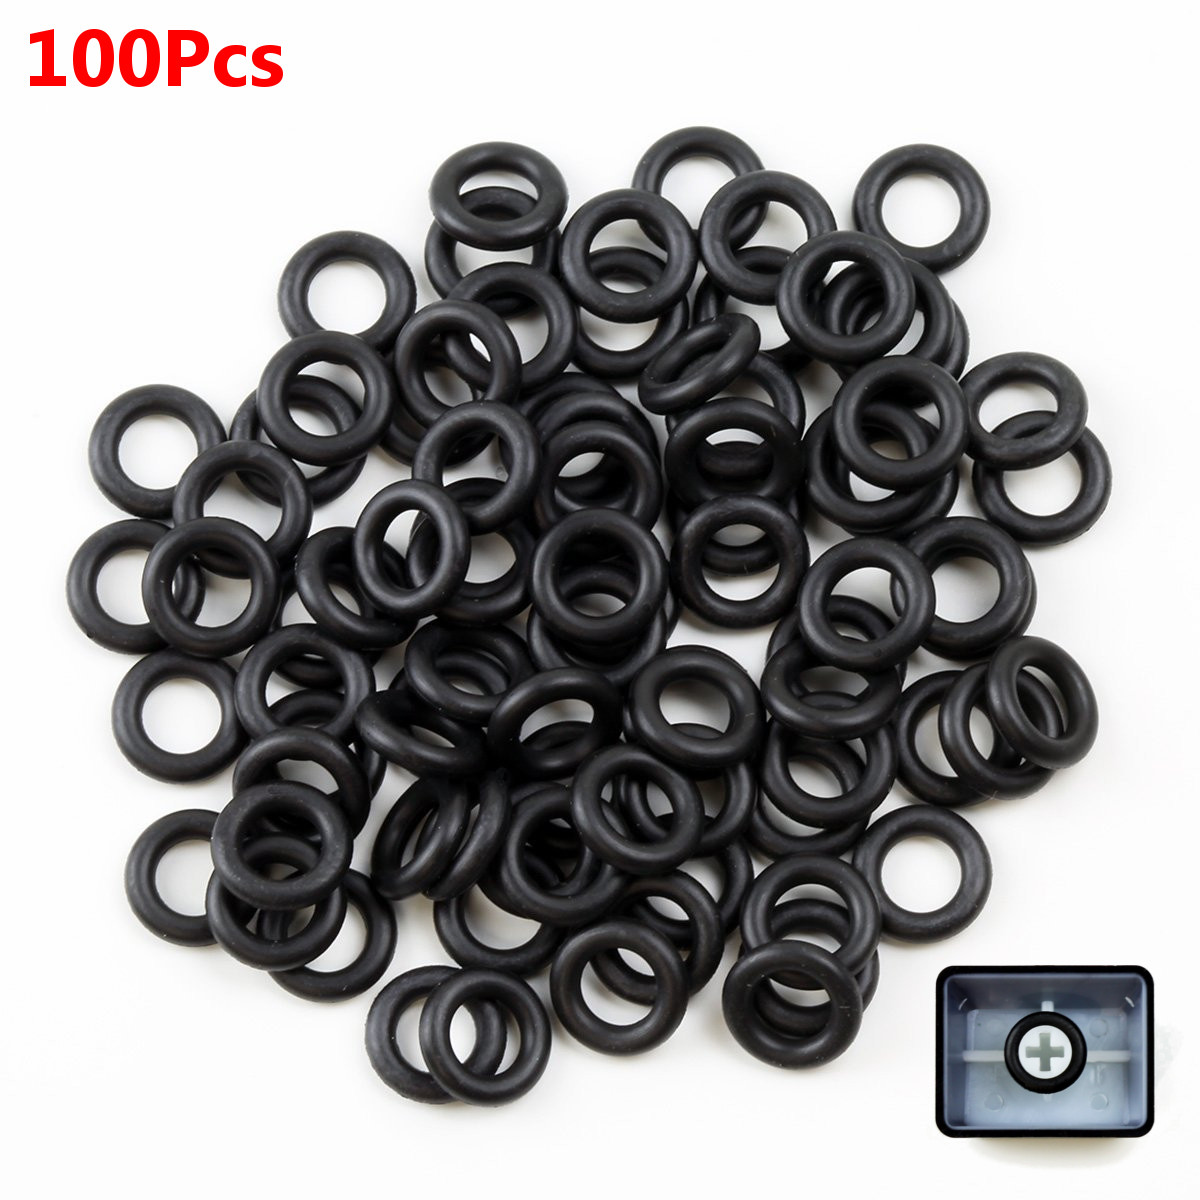 100 Mechanical Keyboard Keycap Rubber O-Ring Switch Dampeners for Cherry MX 52